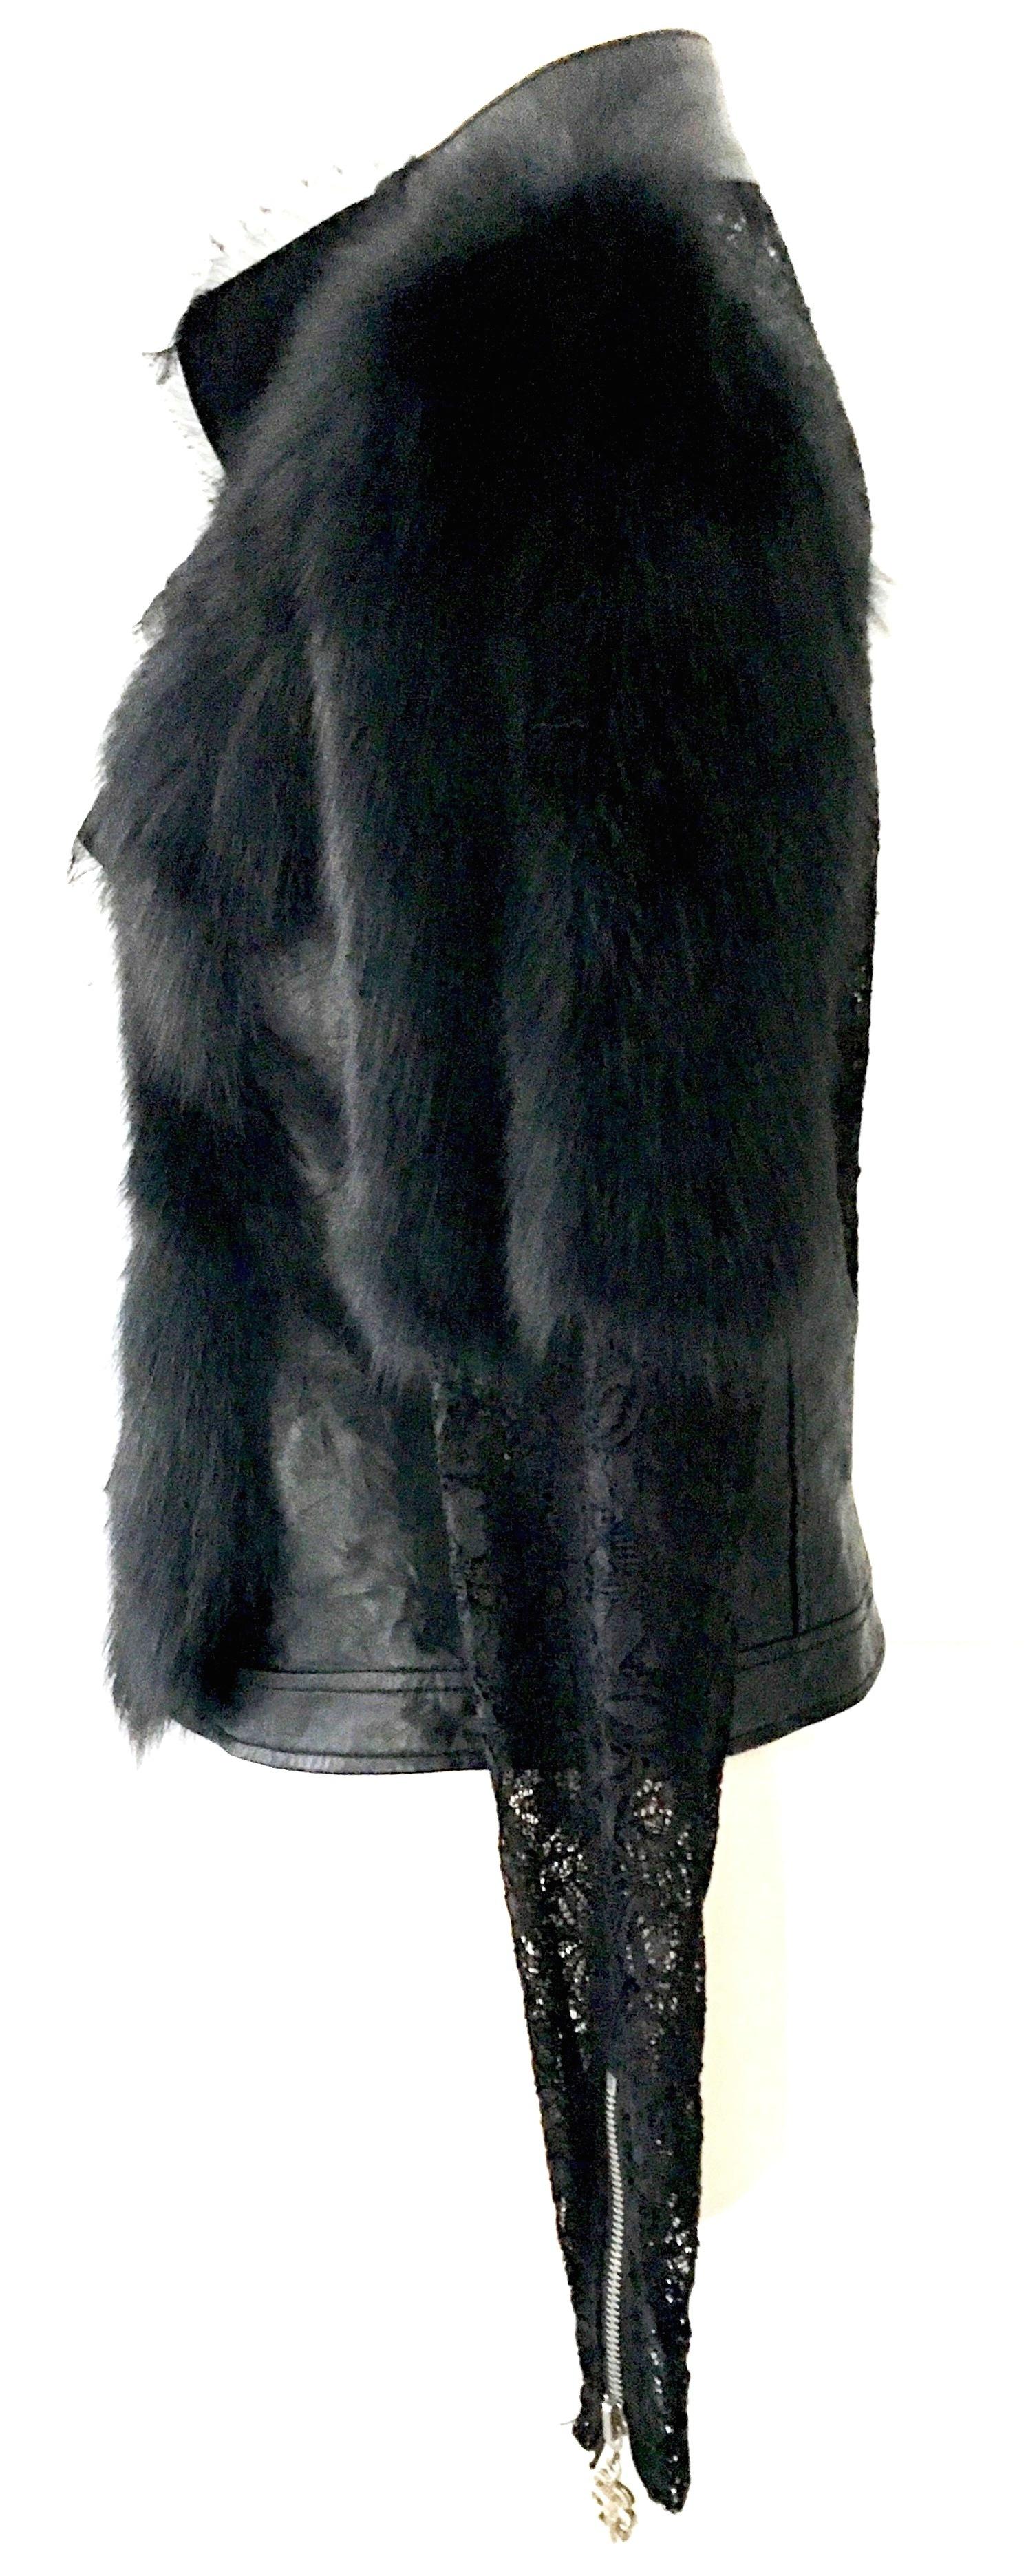 Black 21st Century New Leather Fox Fur & Lace Shirt Or Jacket By, Royal Underground